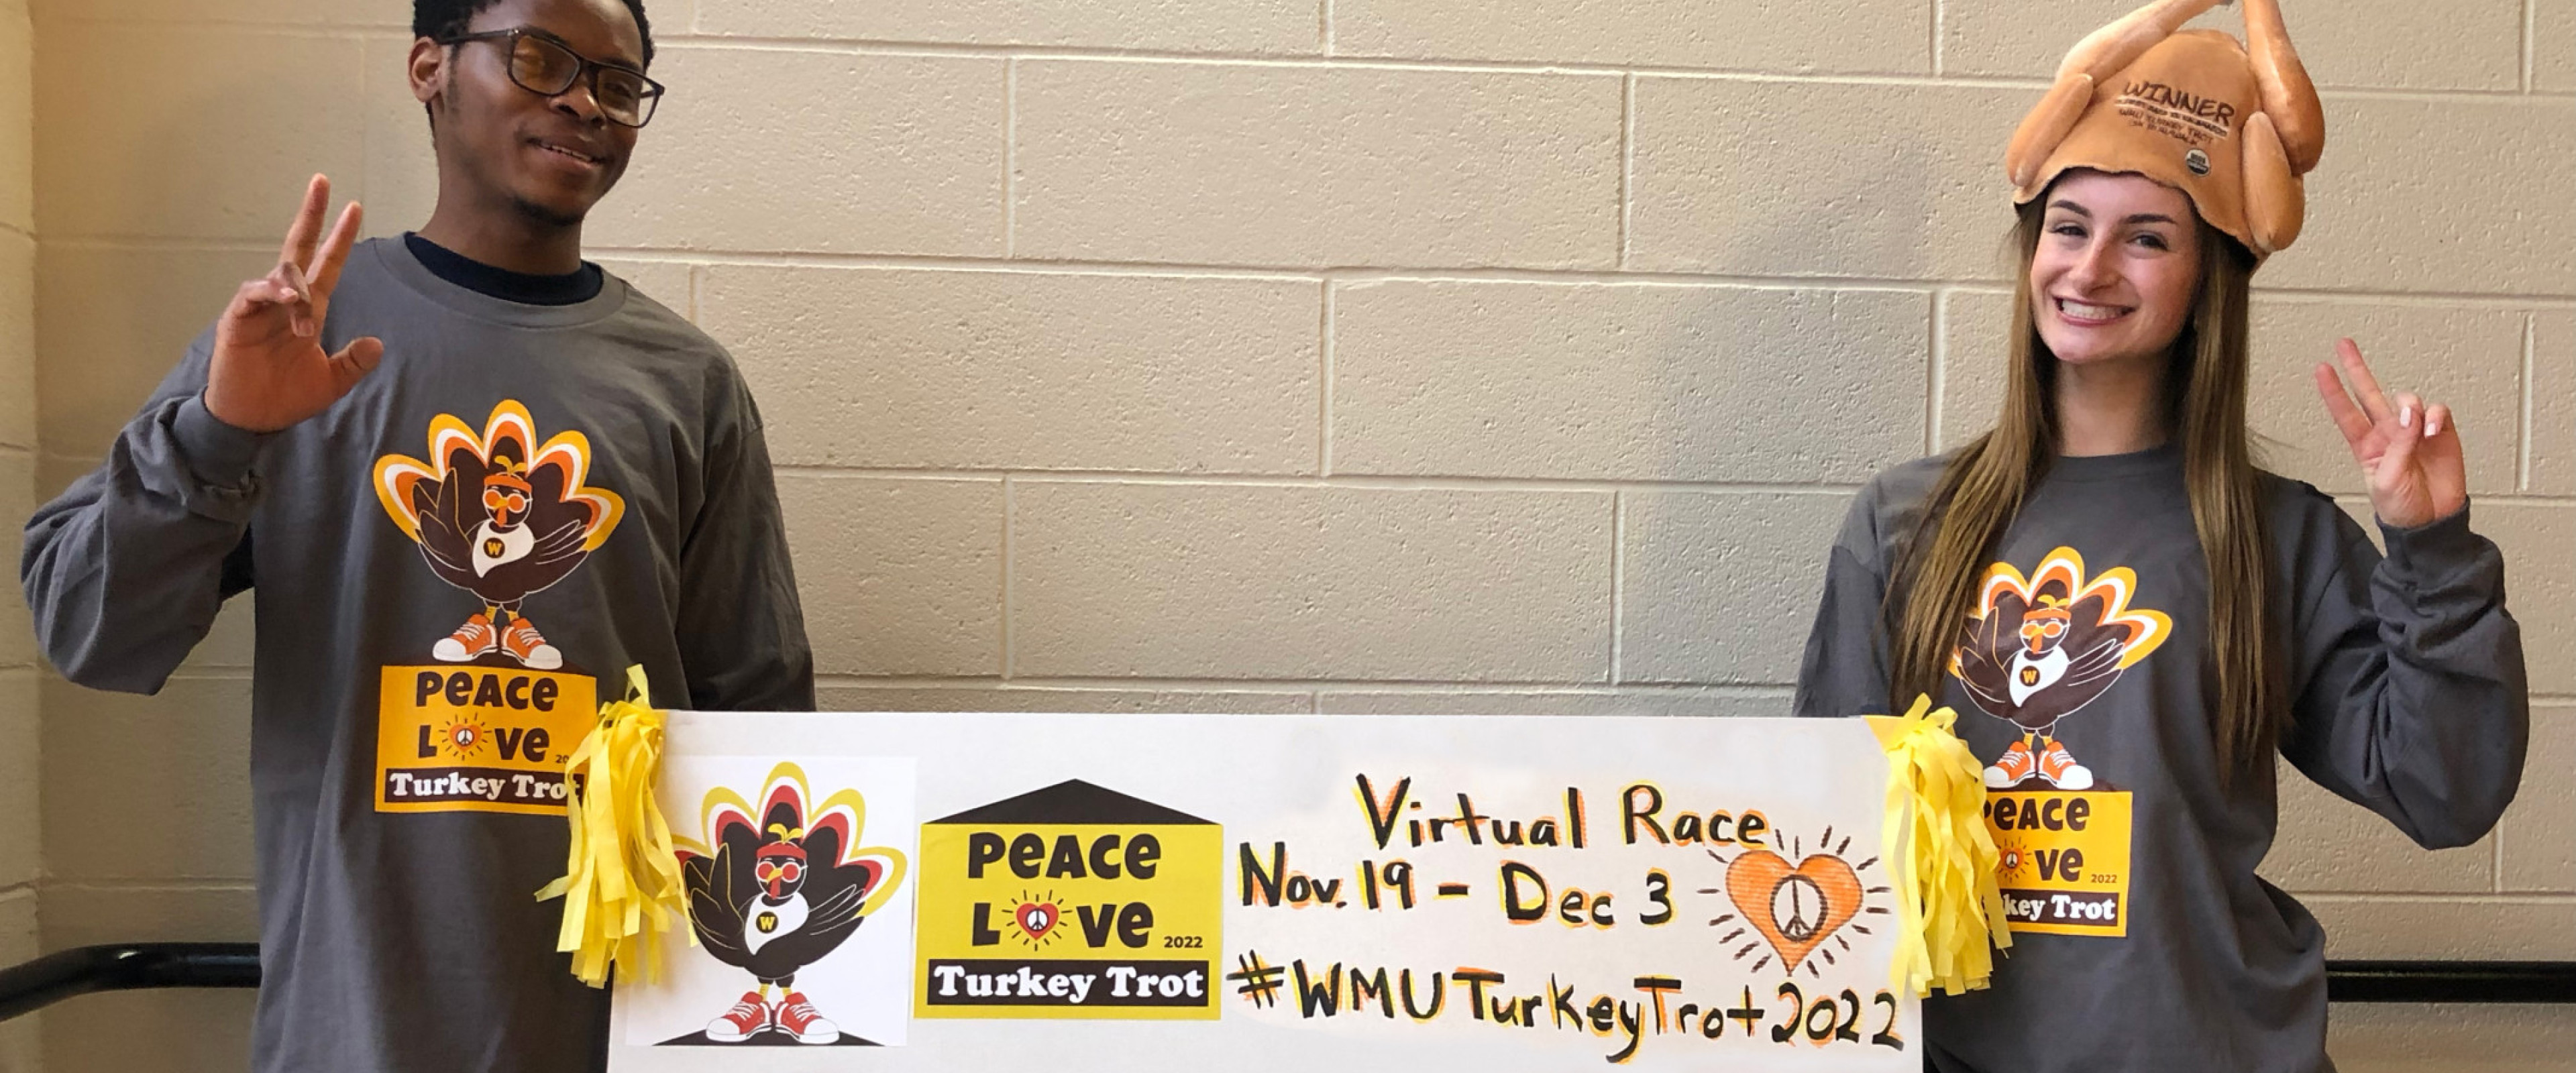 Two people holding a Virtual Turkey Trot sign wearing Turkey Trot T-shirts